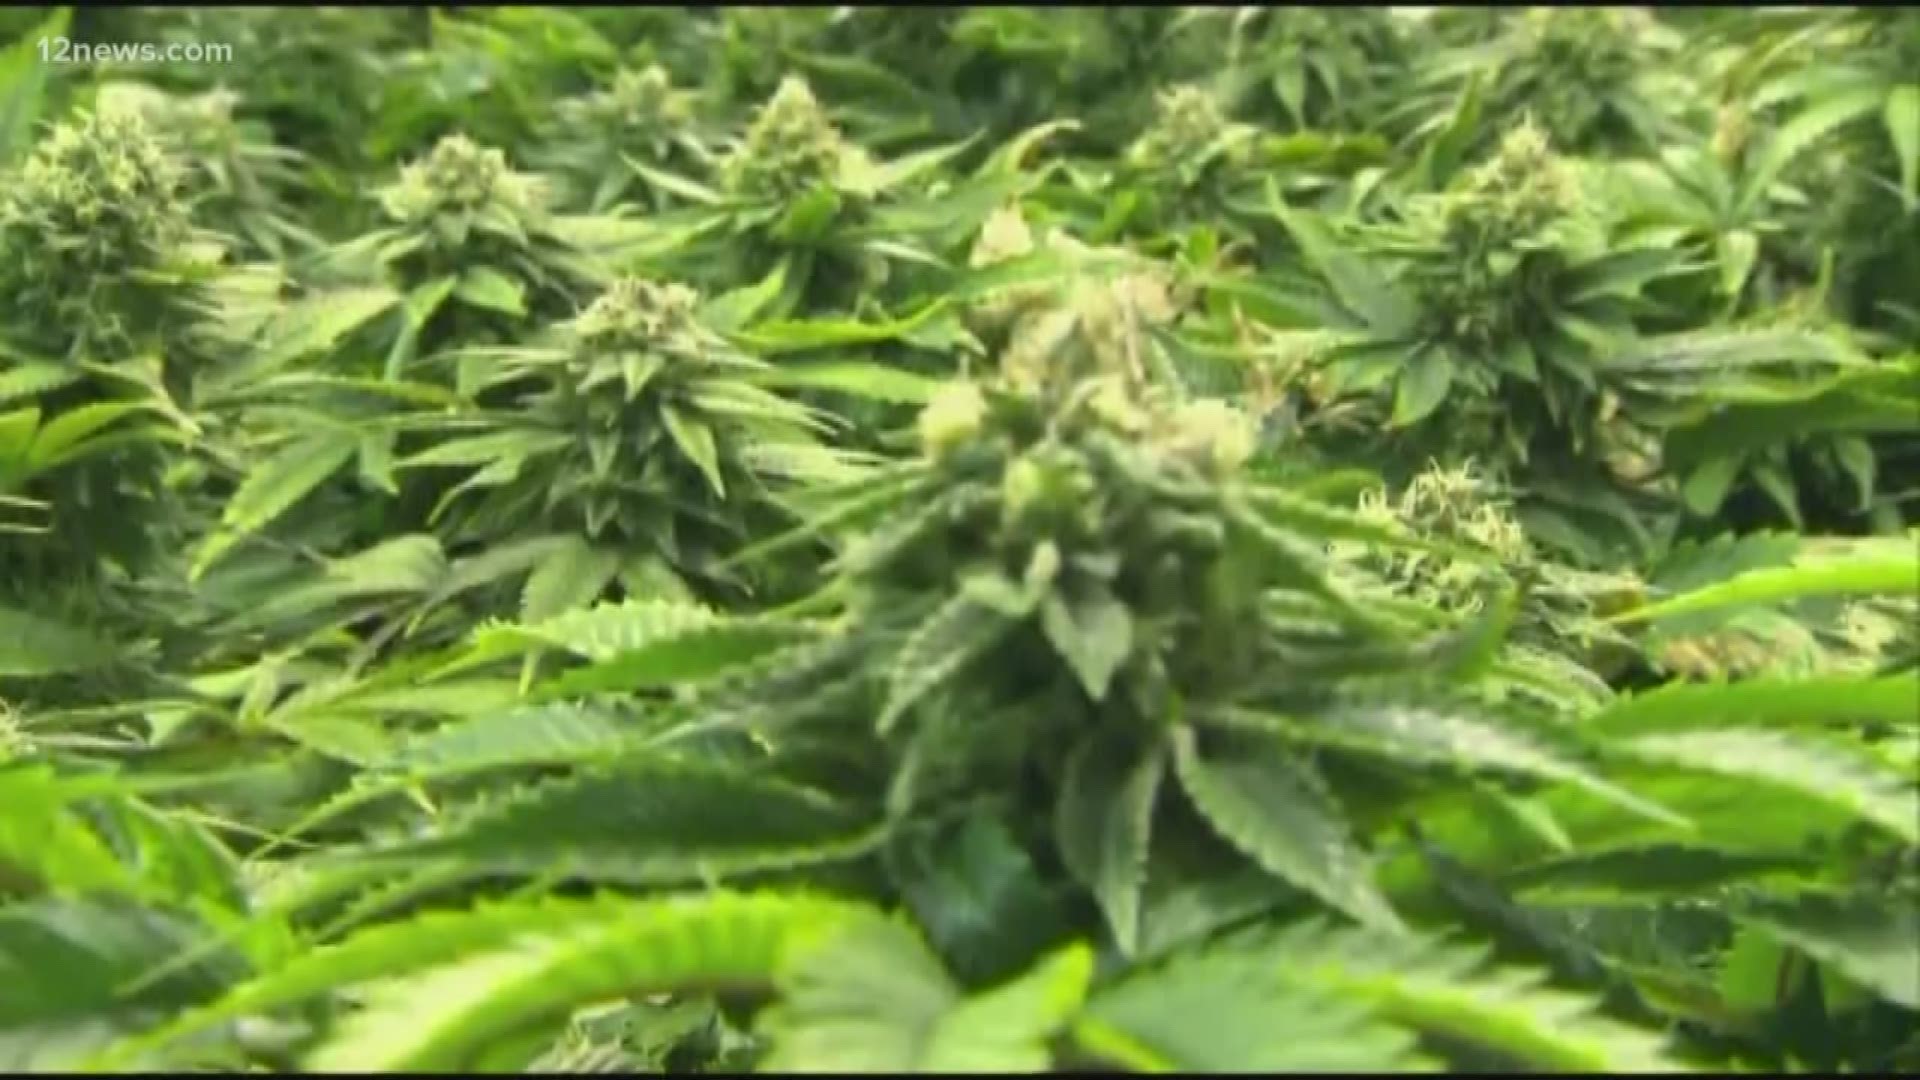 A new report by the State Health Department has found medical marijuana sales have increased 41% in Arizona.